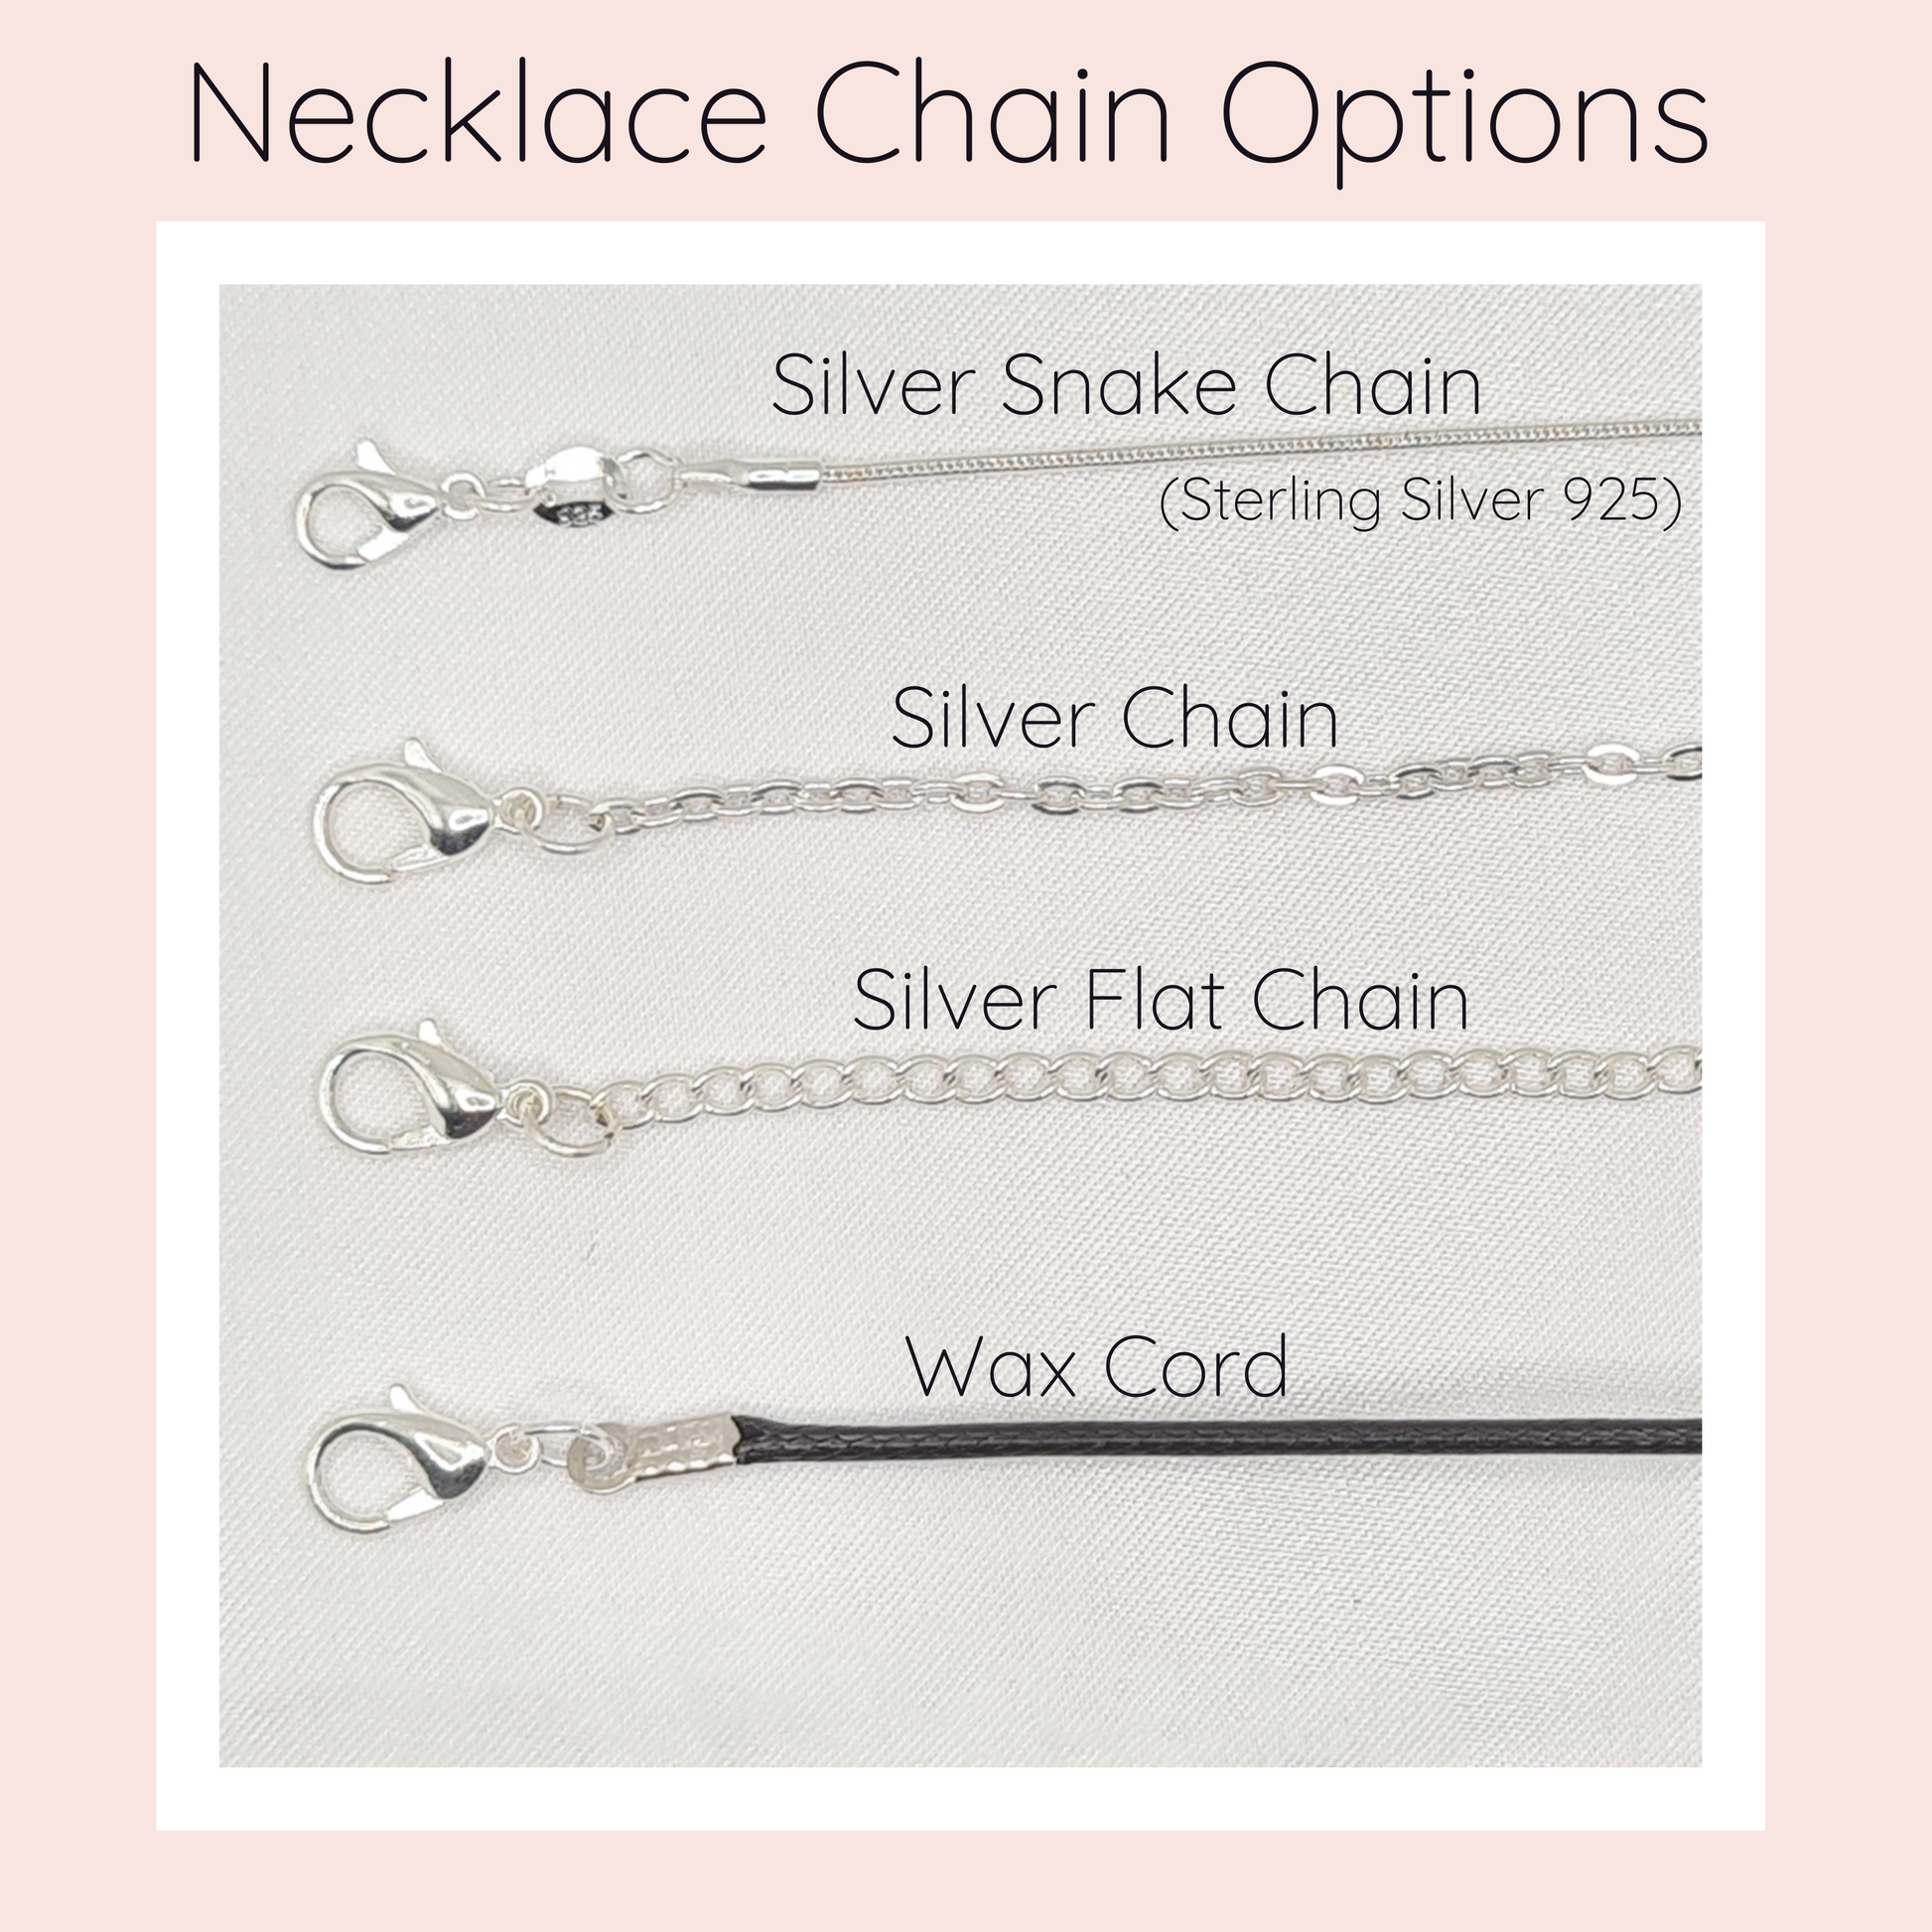 Necklace chain options card